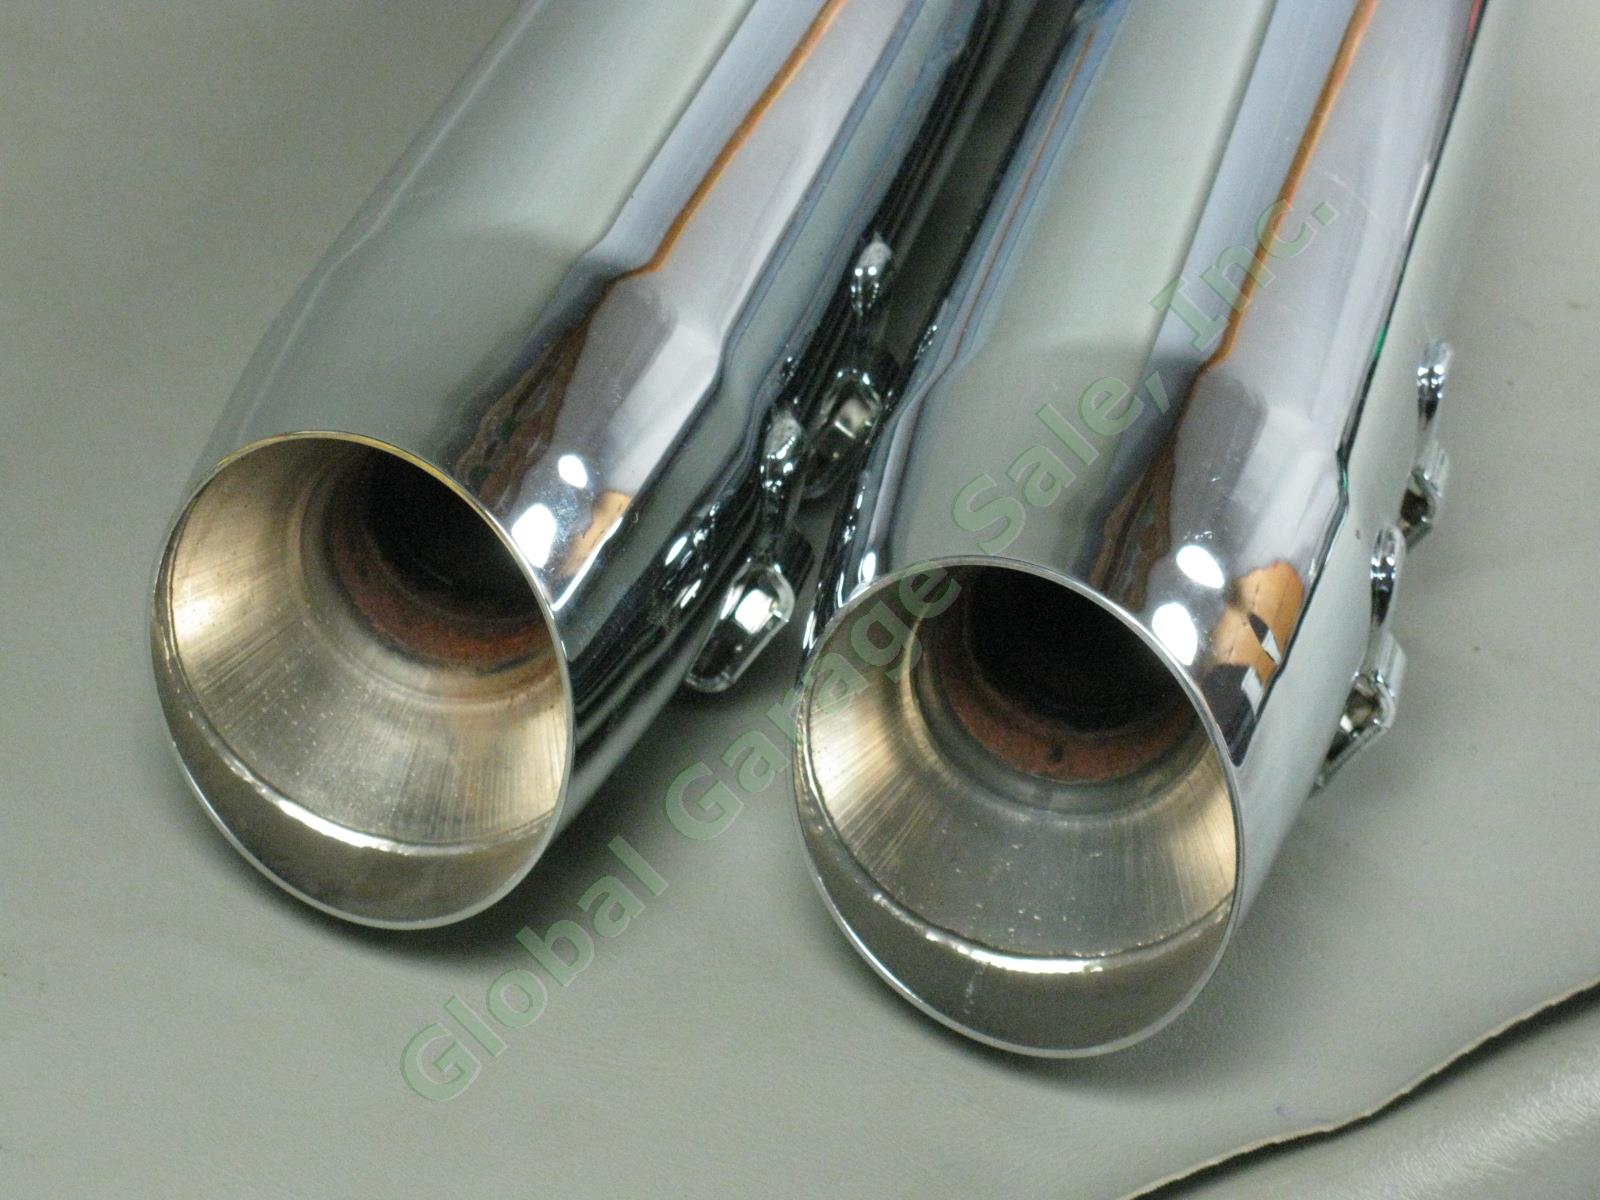 2013 Harley Davidson Street Glide Touring Exhaust Pipes + Slip-Ons + Heat Shield 9